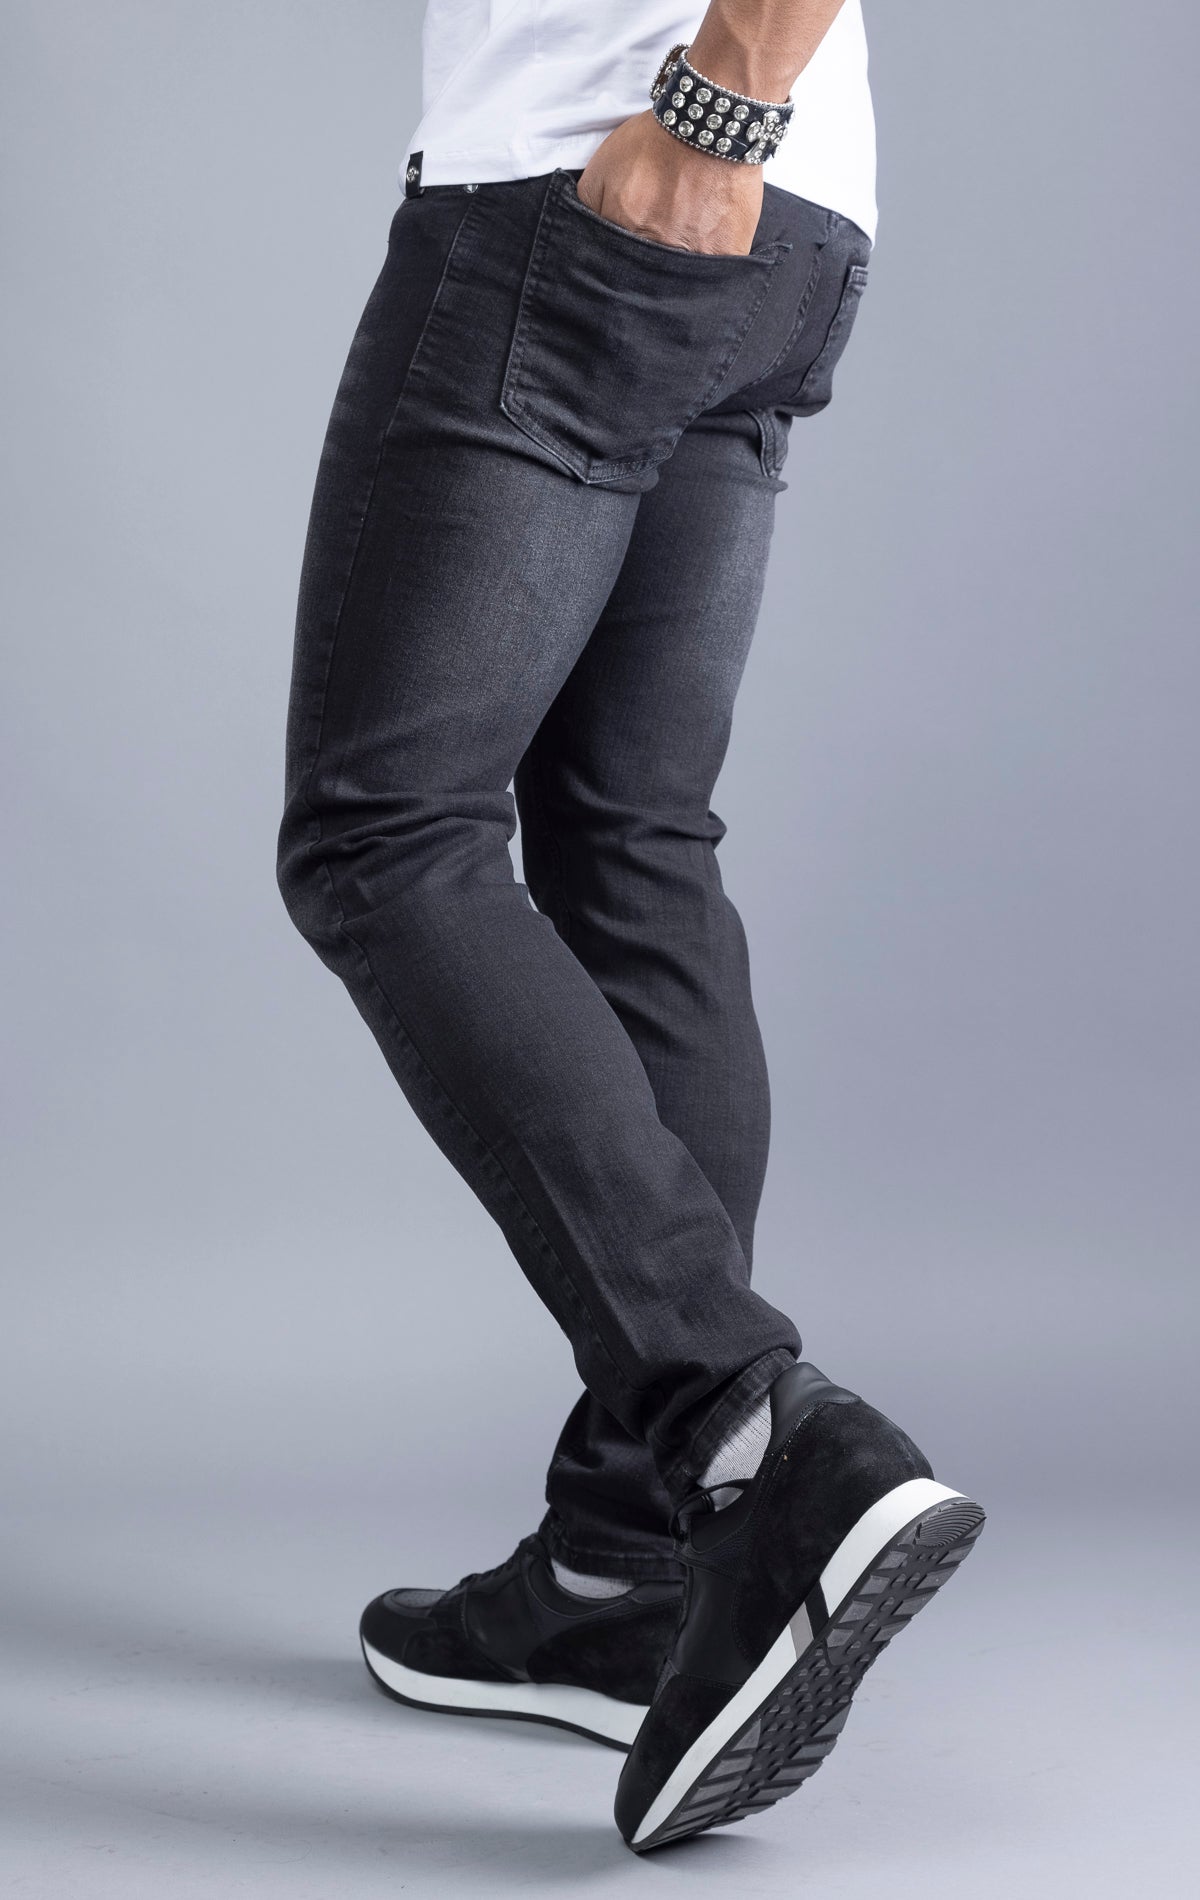 Men's slim fit stretch jeans in denim for a stylish and comfortable look.